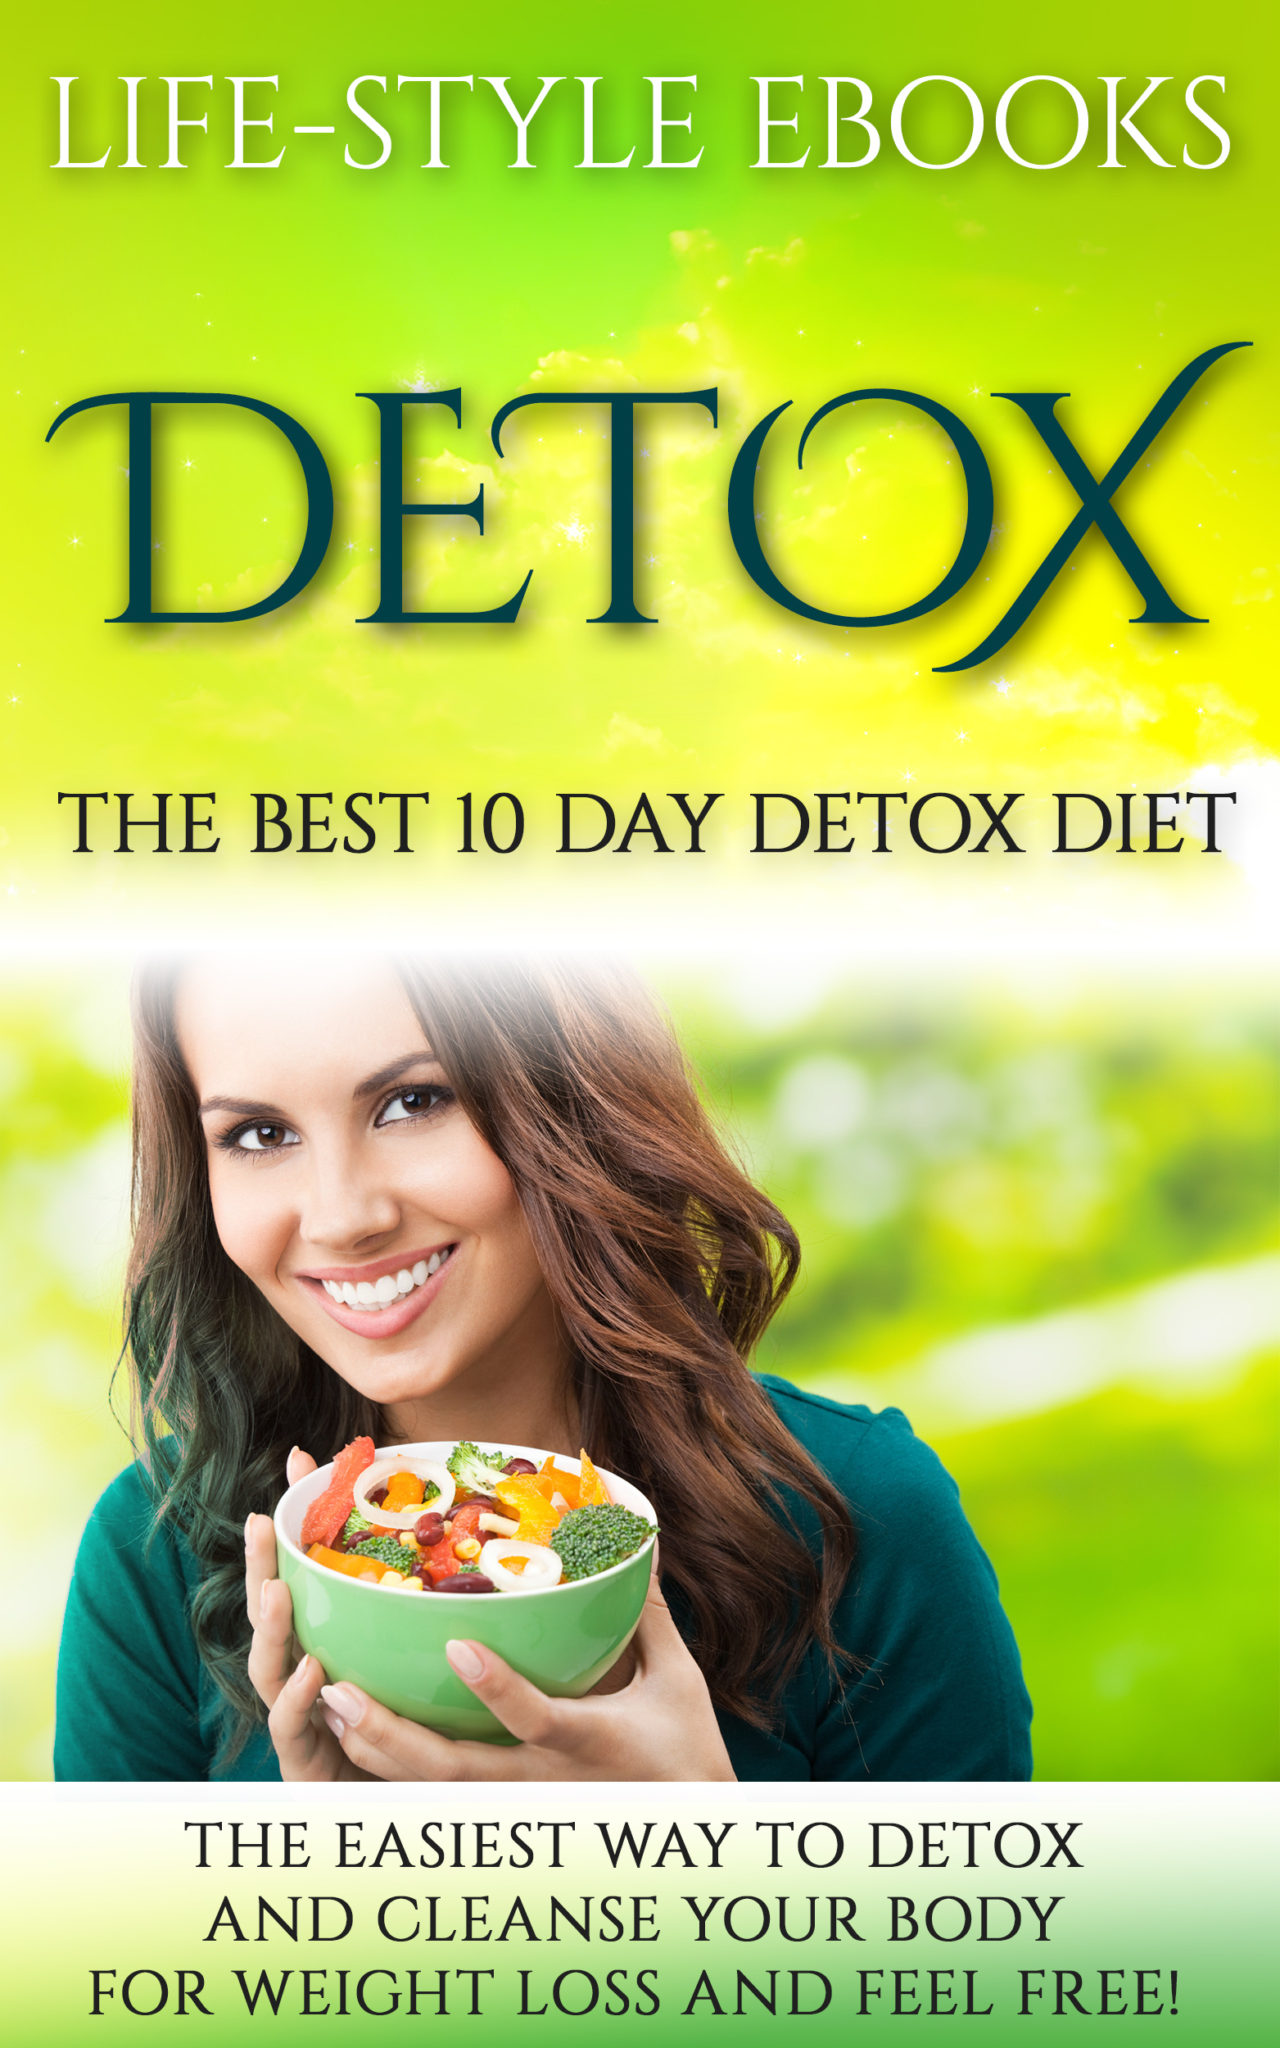 The Best 10 Day DETOX DIET by LIFE-STYLE EBOOKS